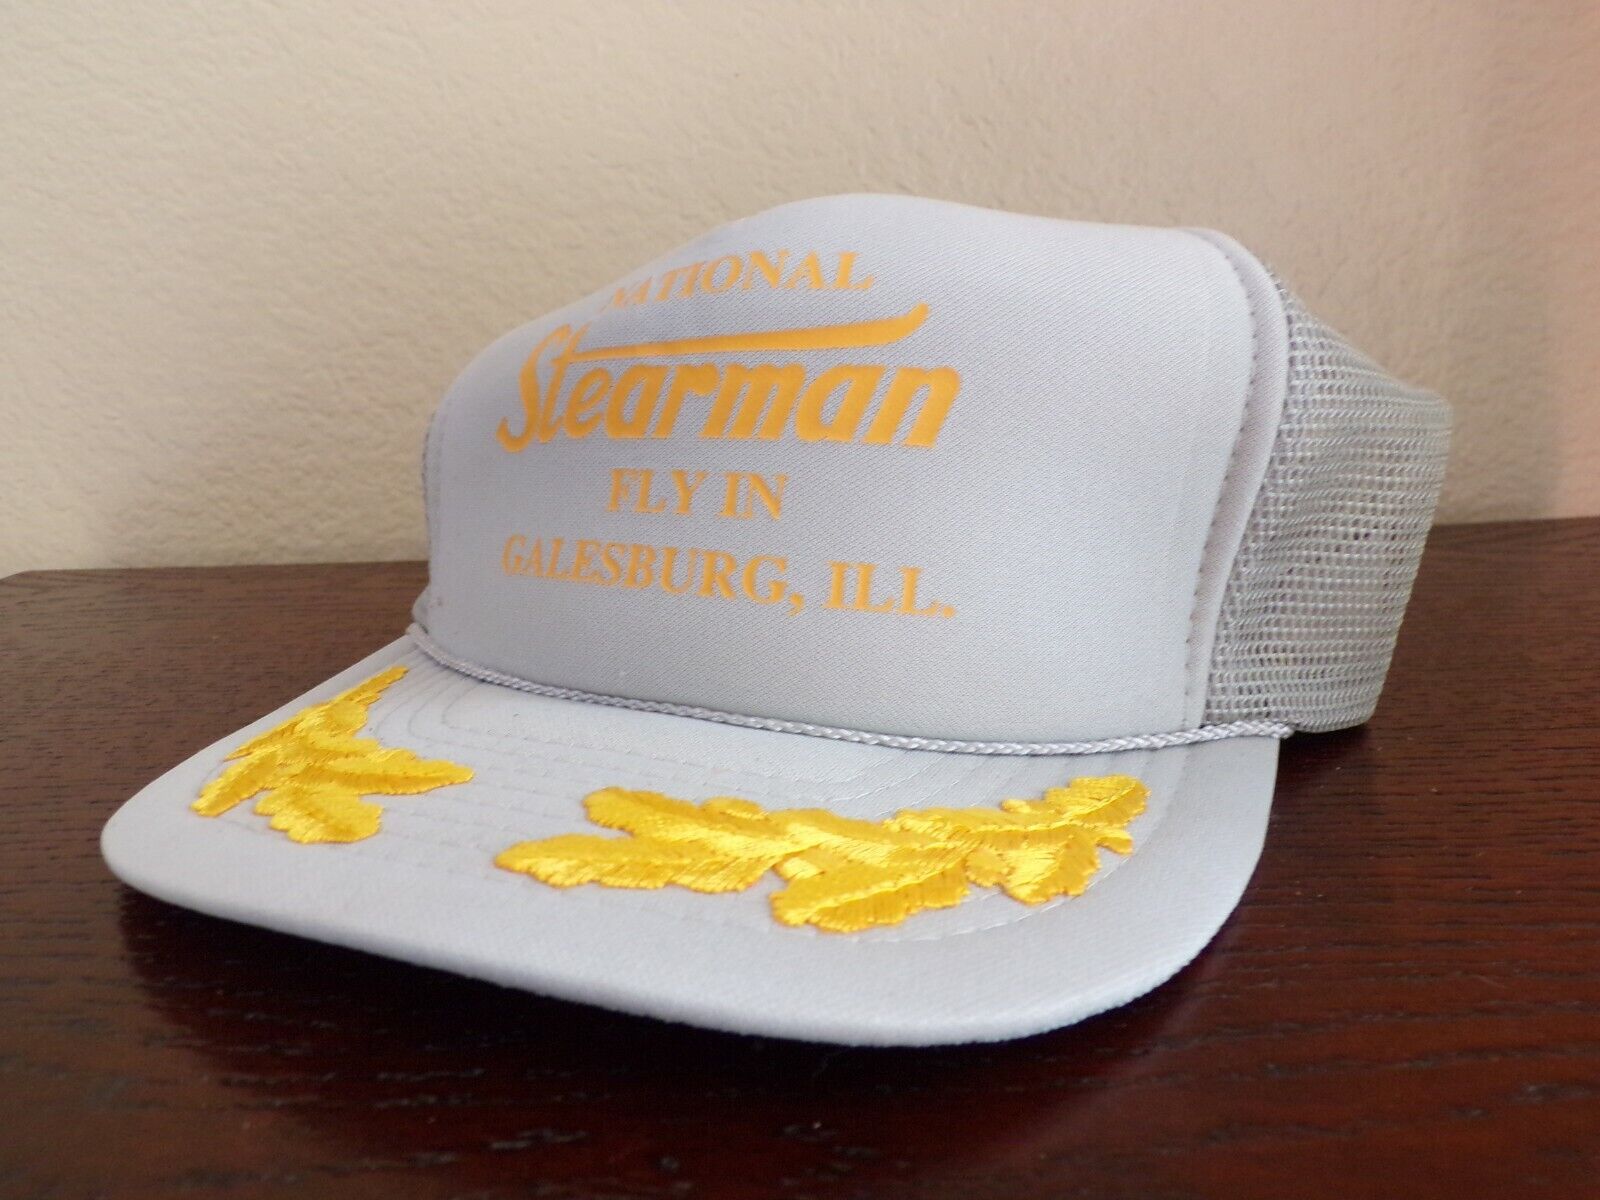 National Stearman Fly In Aviation Hat Galesburg, Illinois